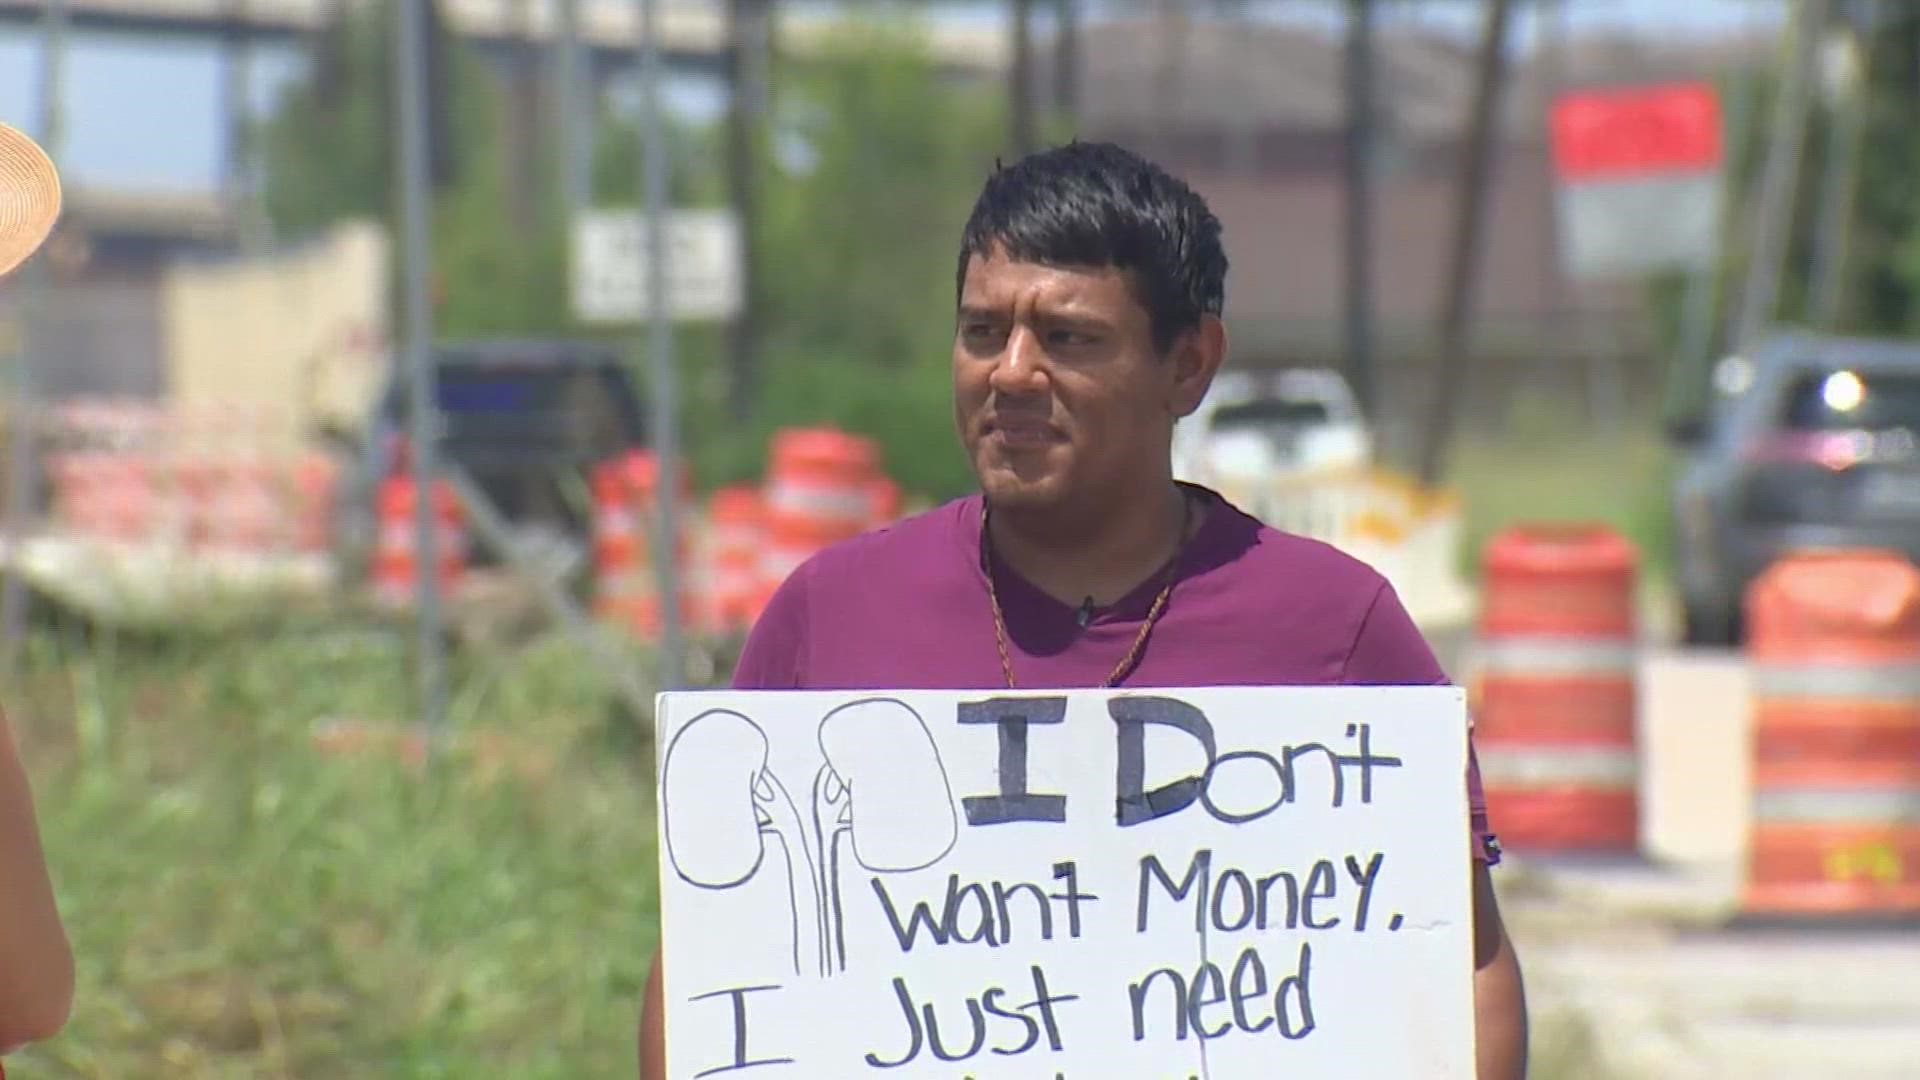 A 24-year-old Houston man needs your help, he’s in need of a kidney donor. And his search has taken him to the streets.